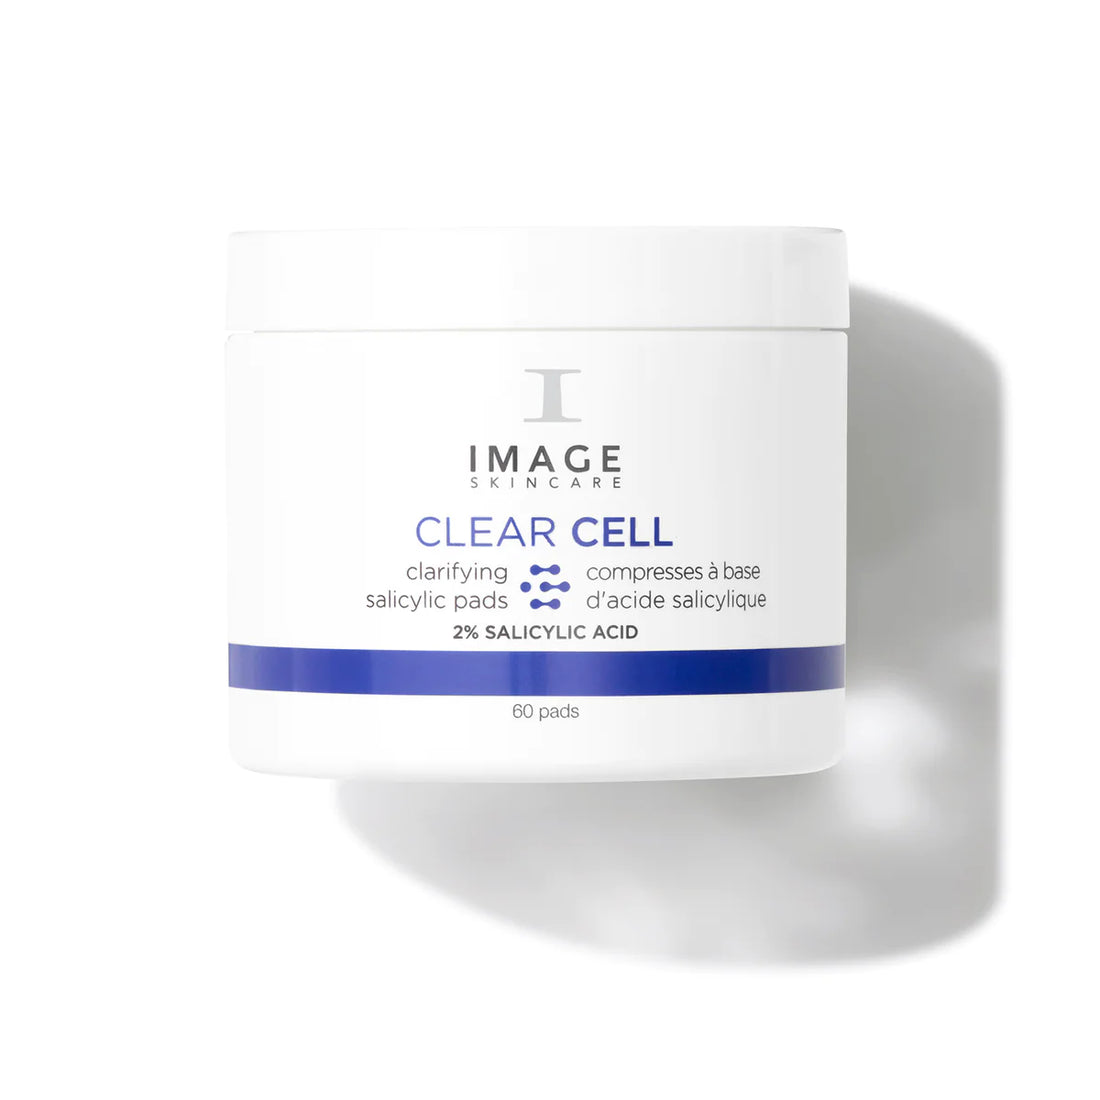 IMAGE CLEAR CELL salicylic clarifying pads